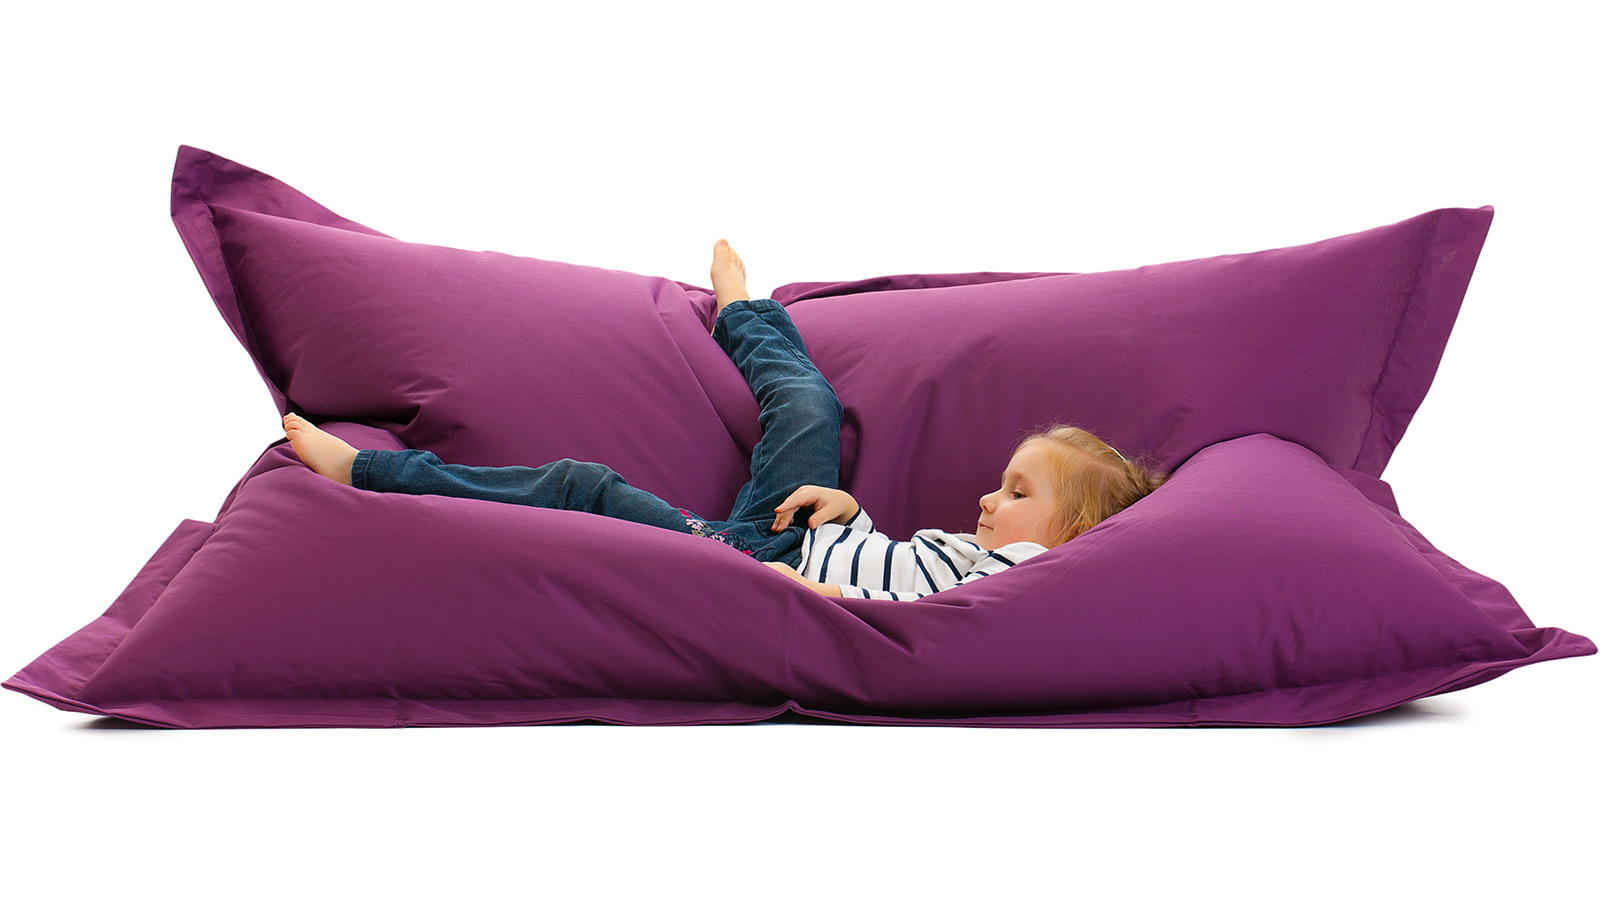 Is there a beanbag chair I can rest easy on?